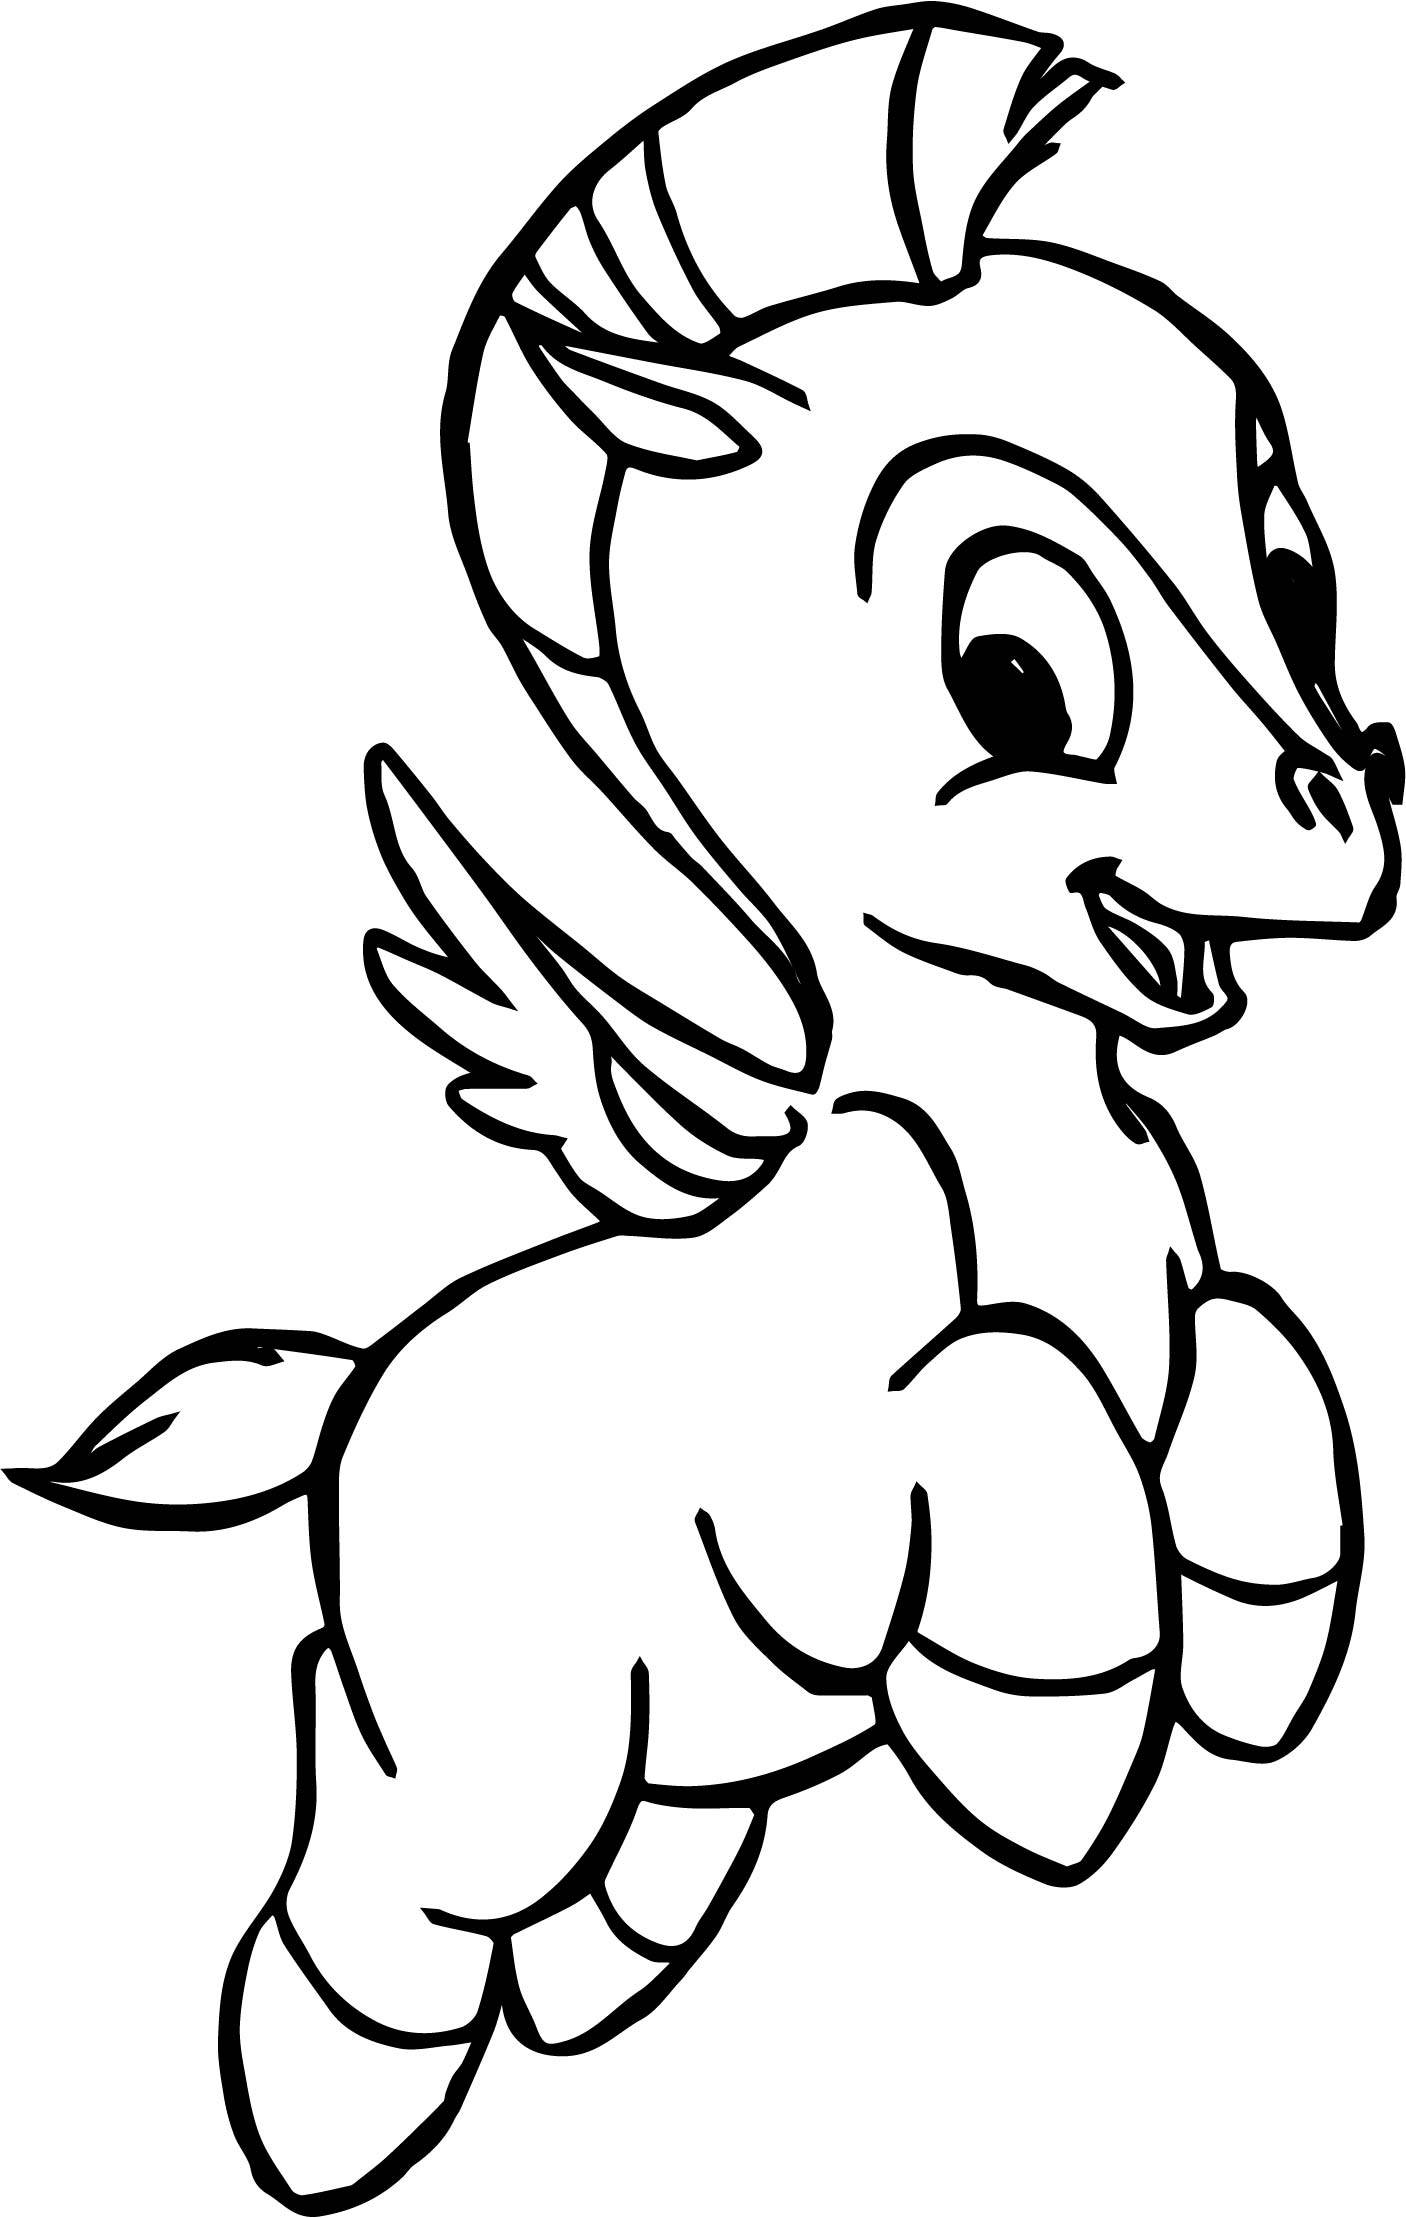 Pegasus Coloring Pages For Adults at GetDrawings | Free download